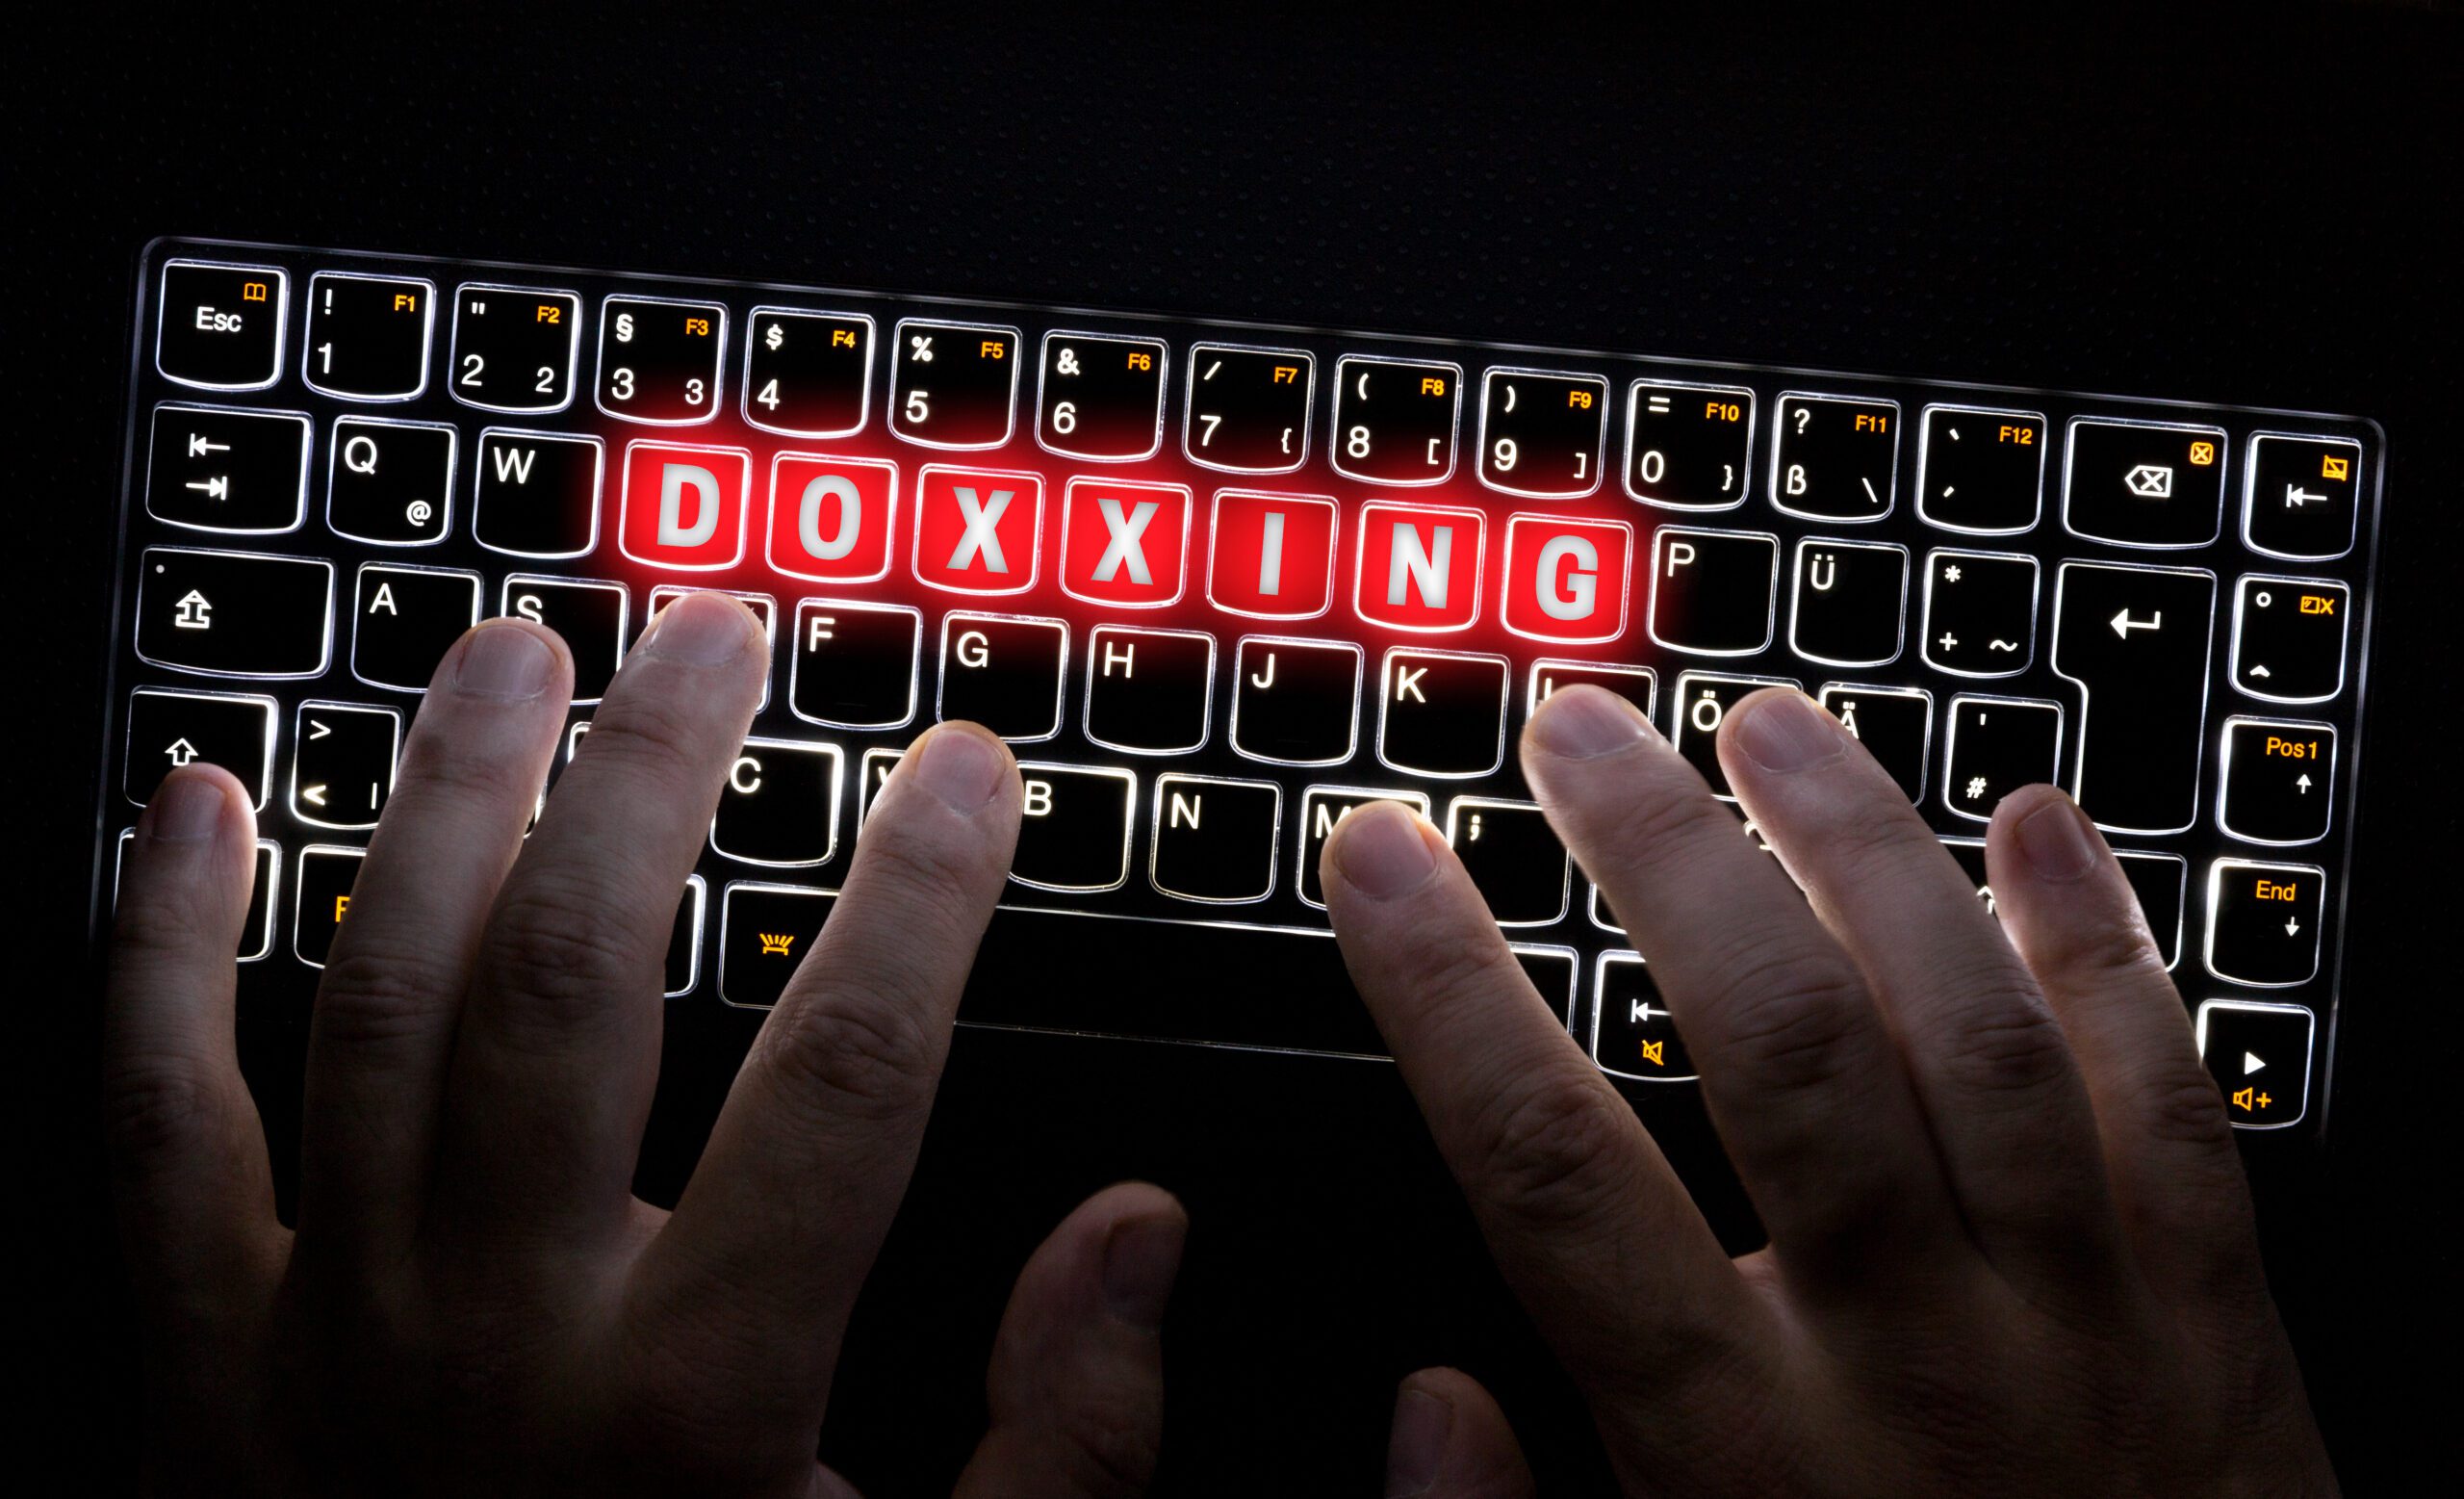 Hands typing on a backlit keyboard with the word "doxxing" illuminated in red letters on the keys.